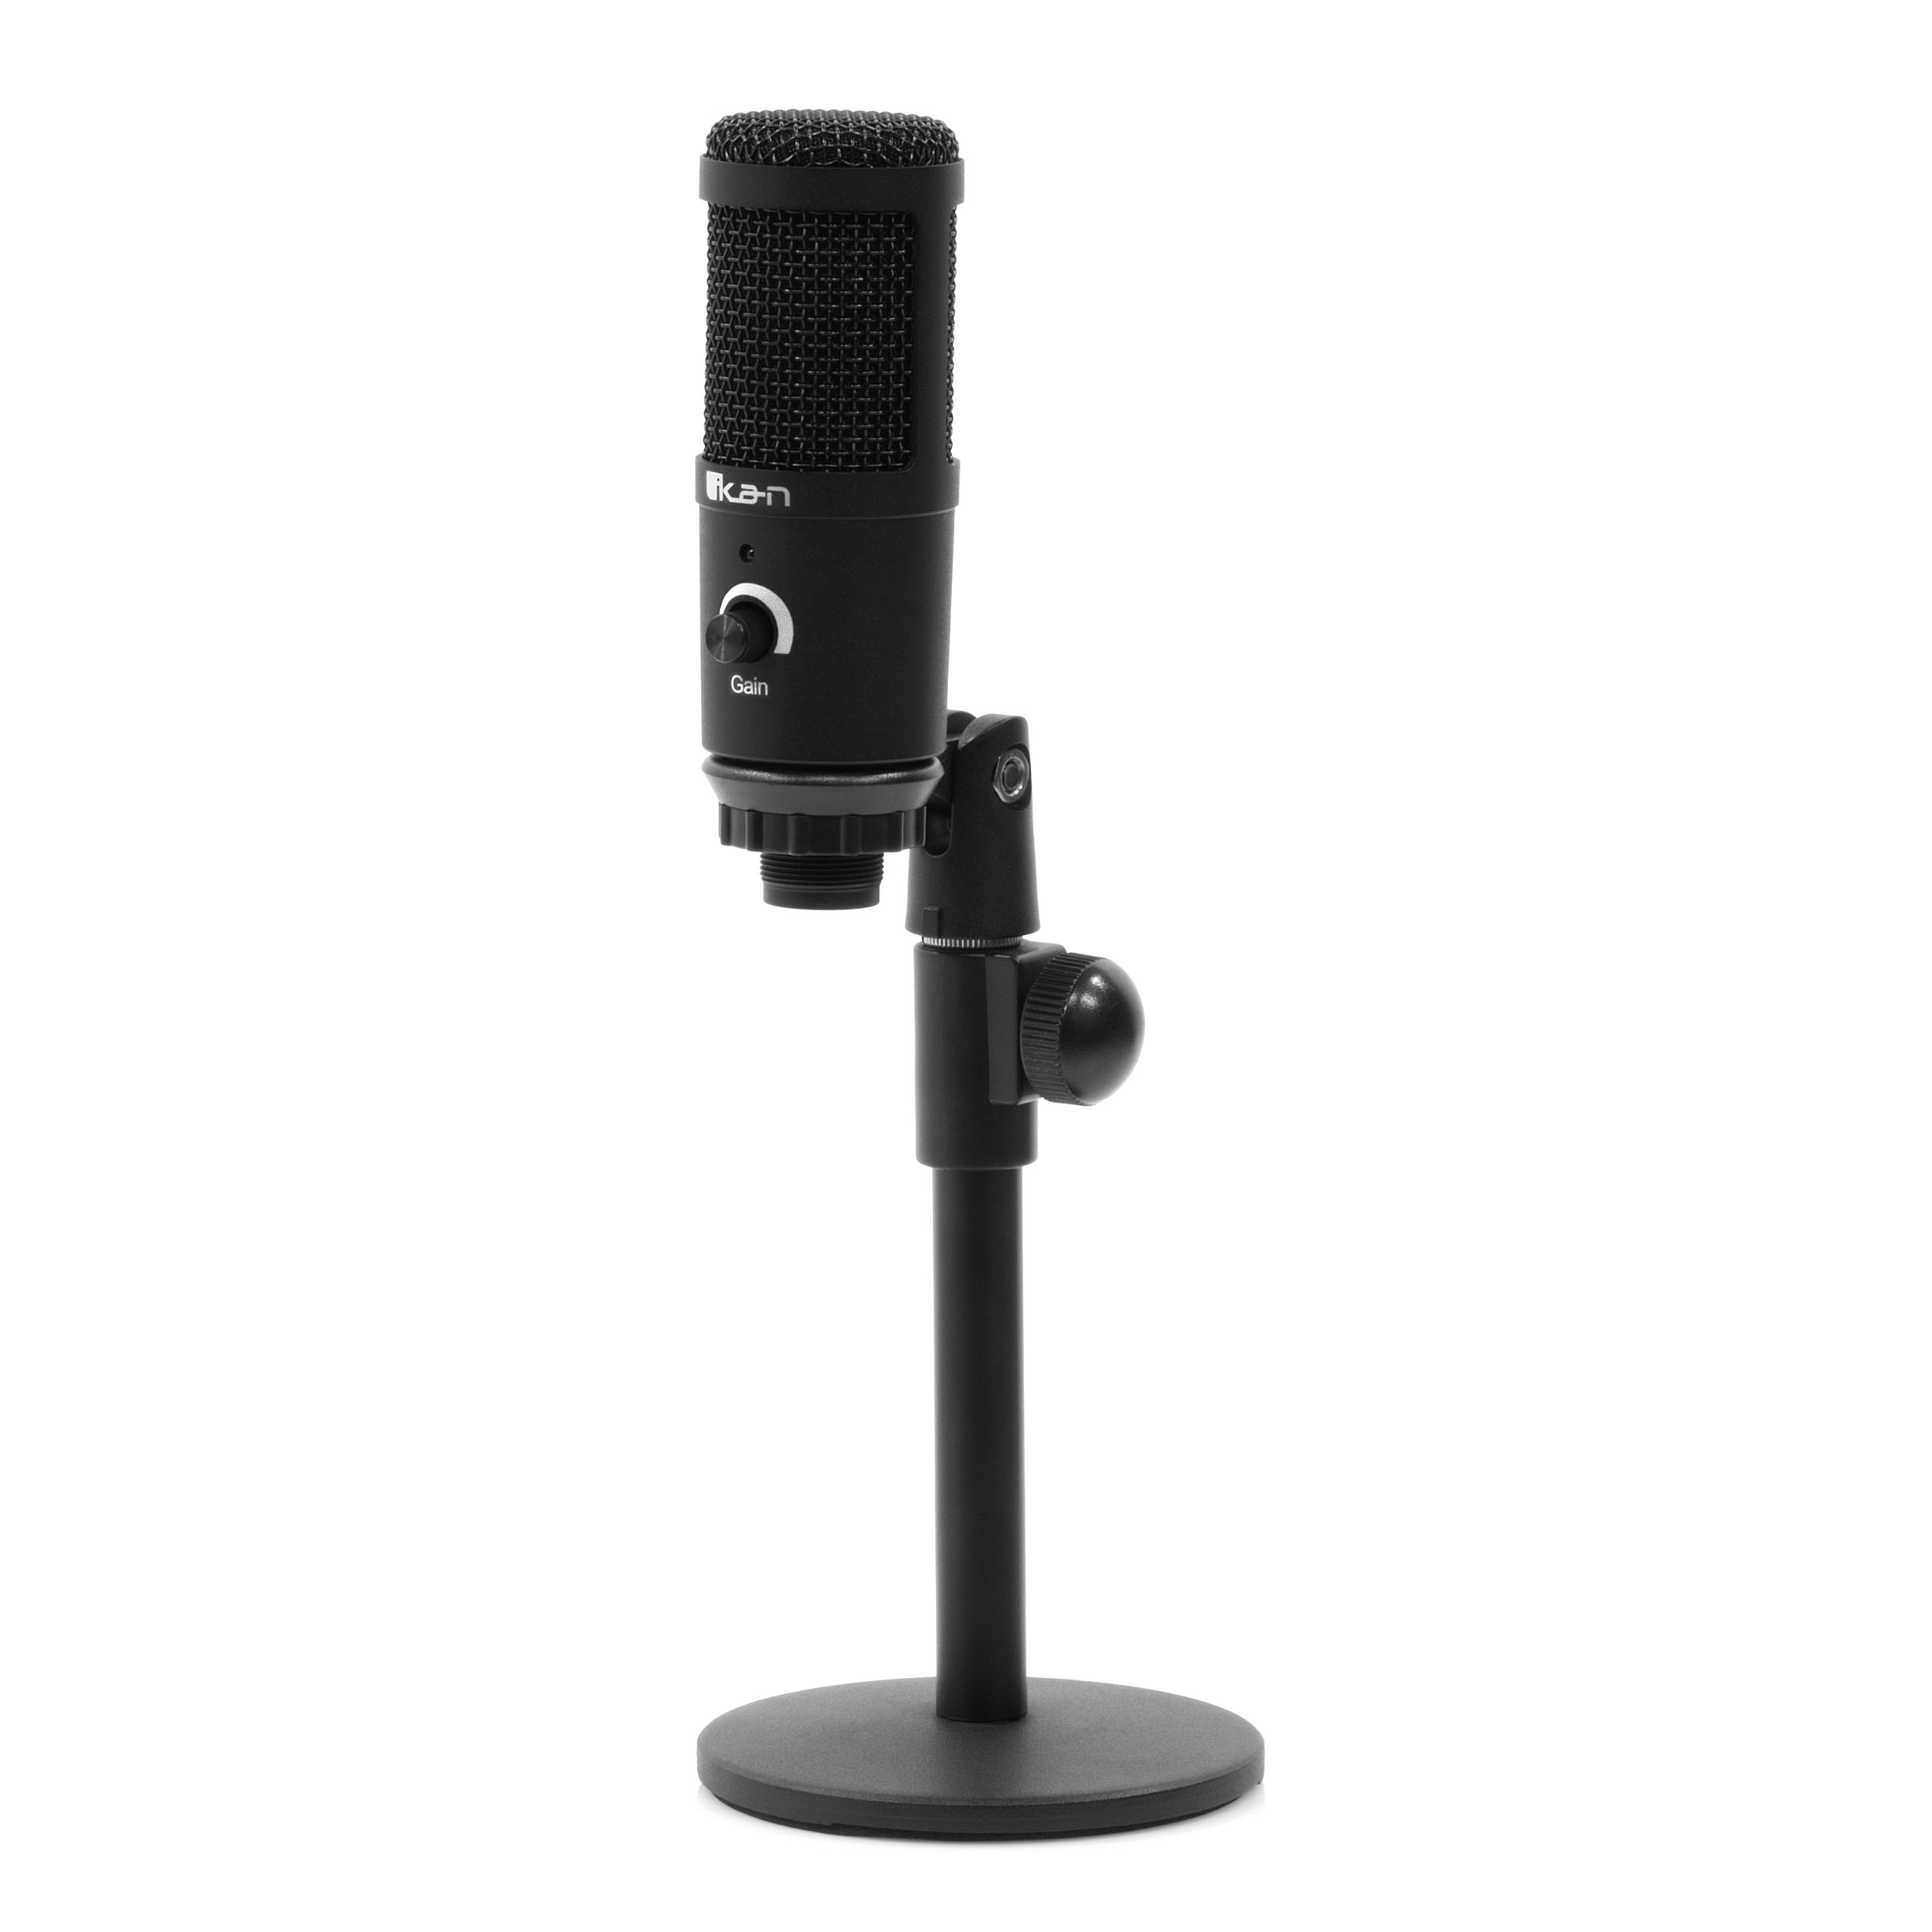 HomeStream™ Condenser Cardioid w/ Gain and Height-Adjustable Stand - Ikan